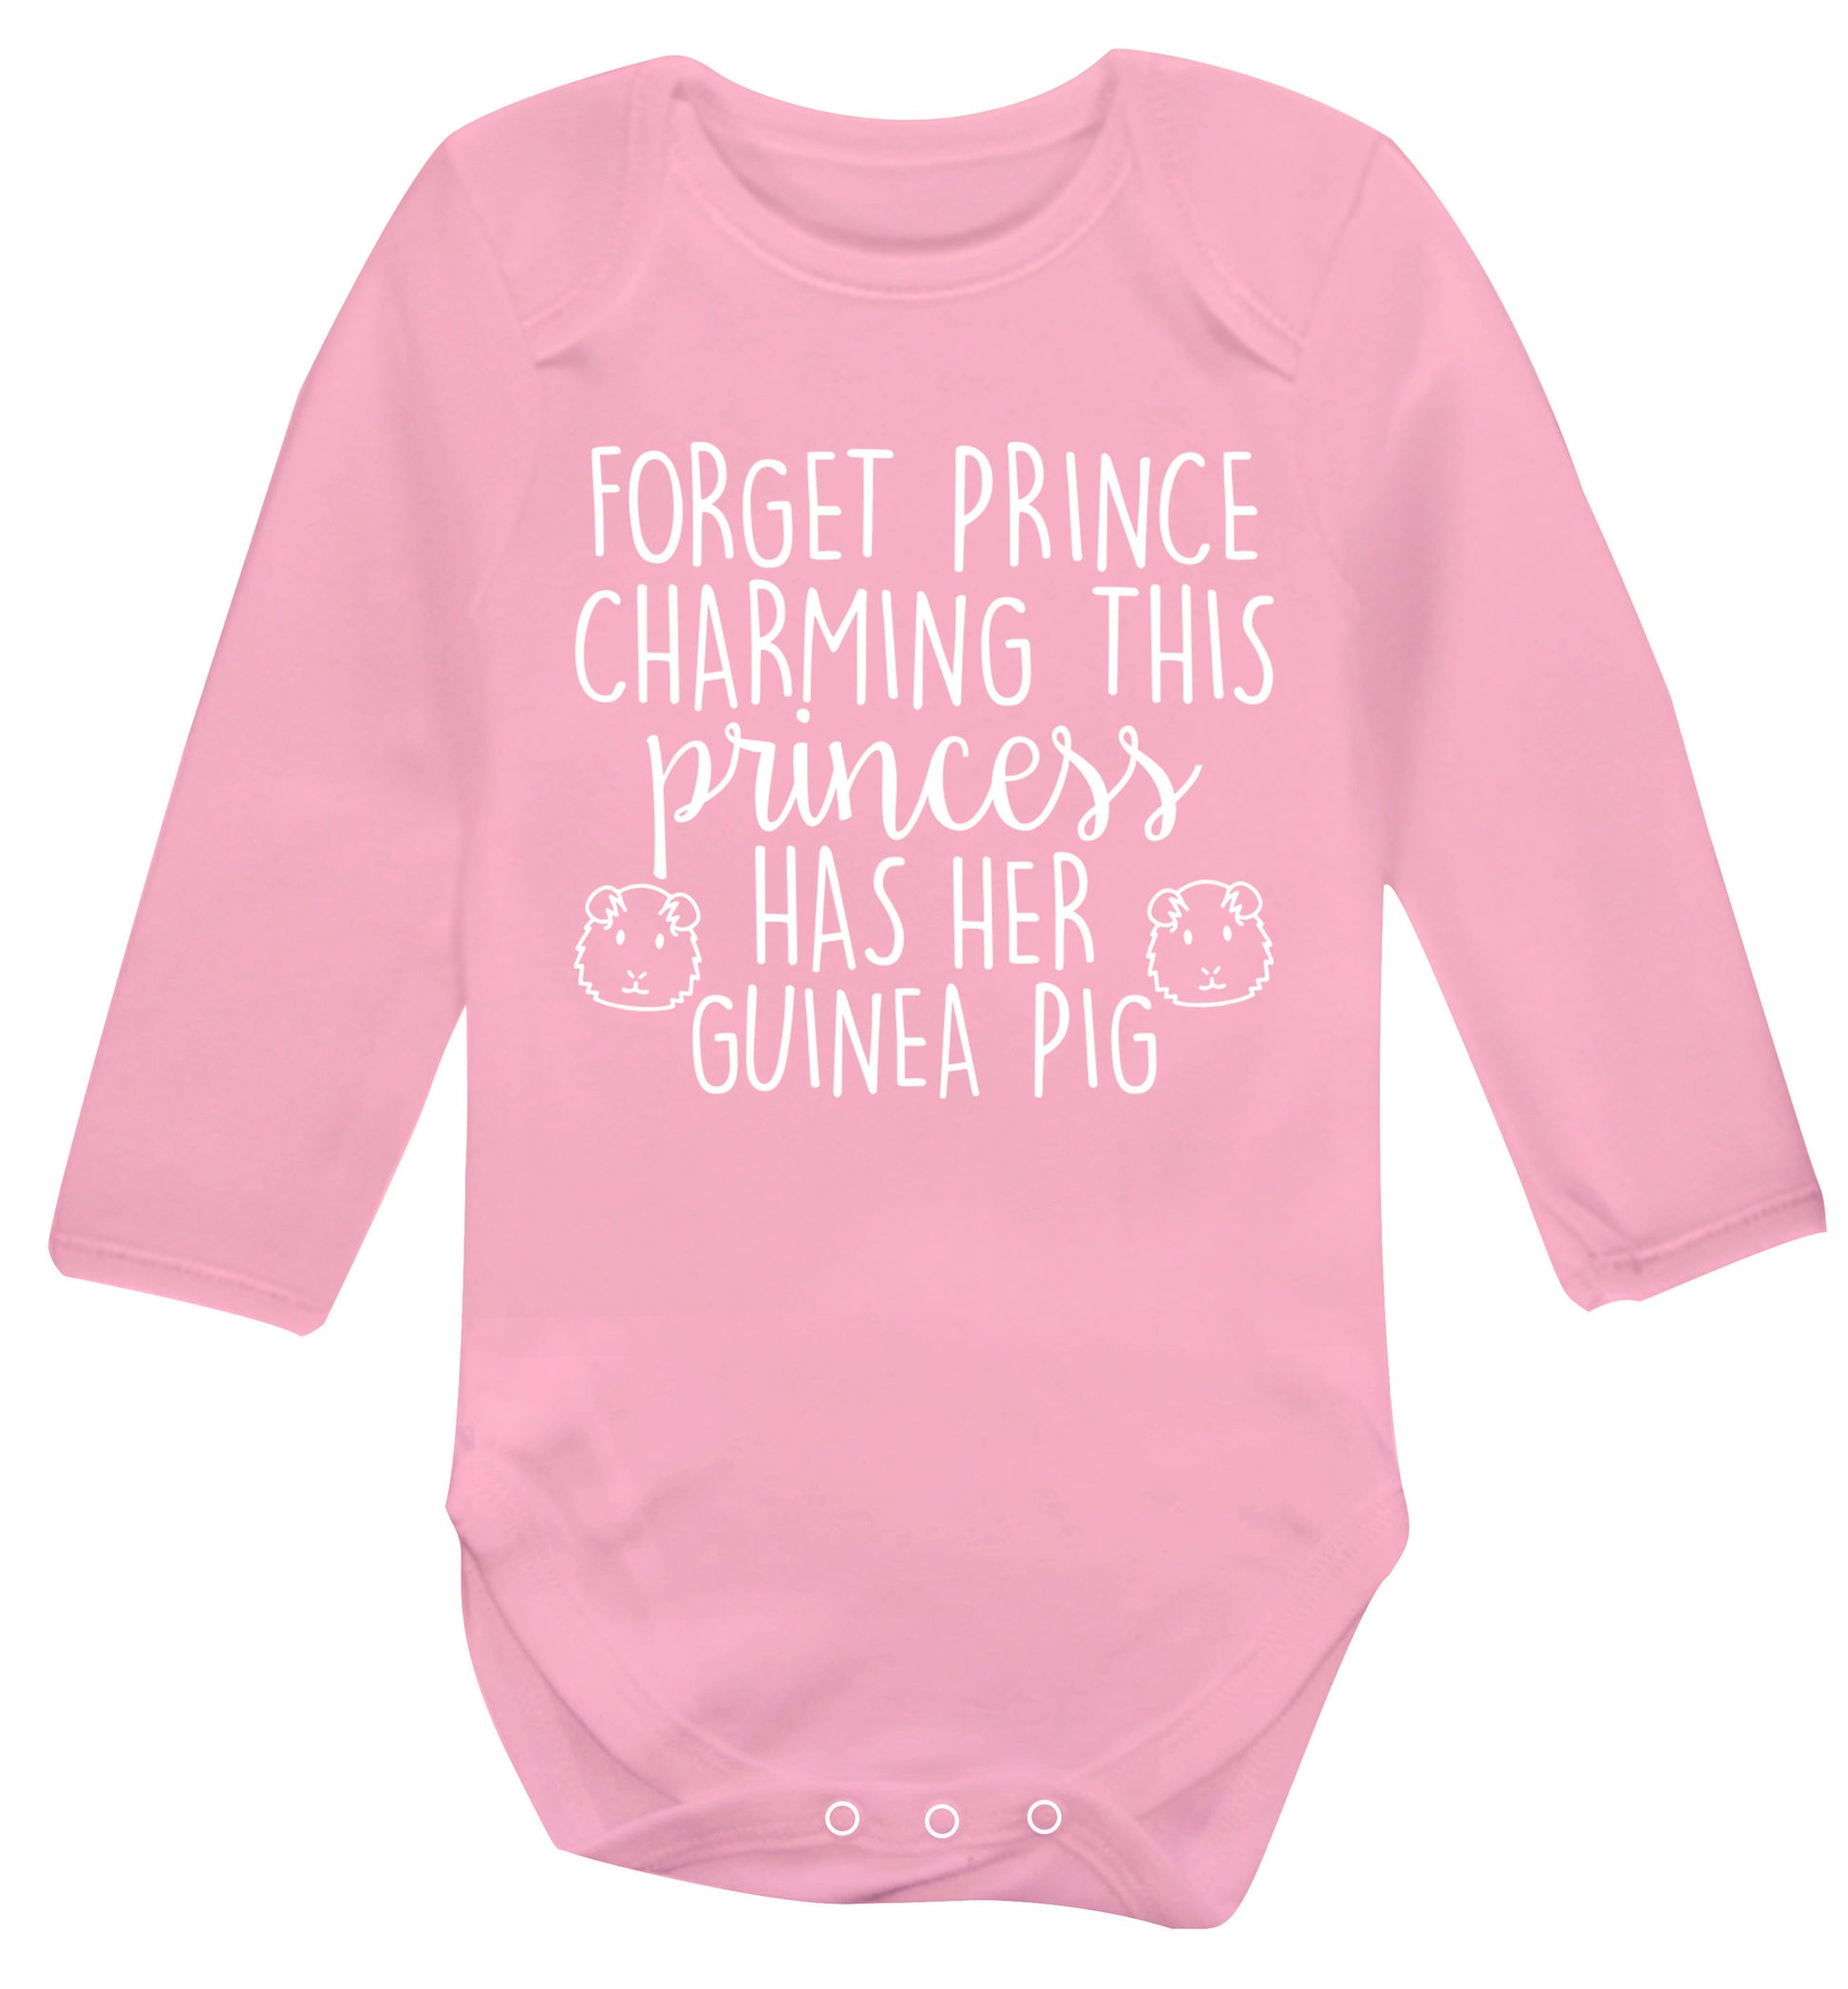 Forget prince charming, I have my guinea pig Baby Vest long sleeved pale pink 6-12 months